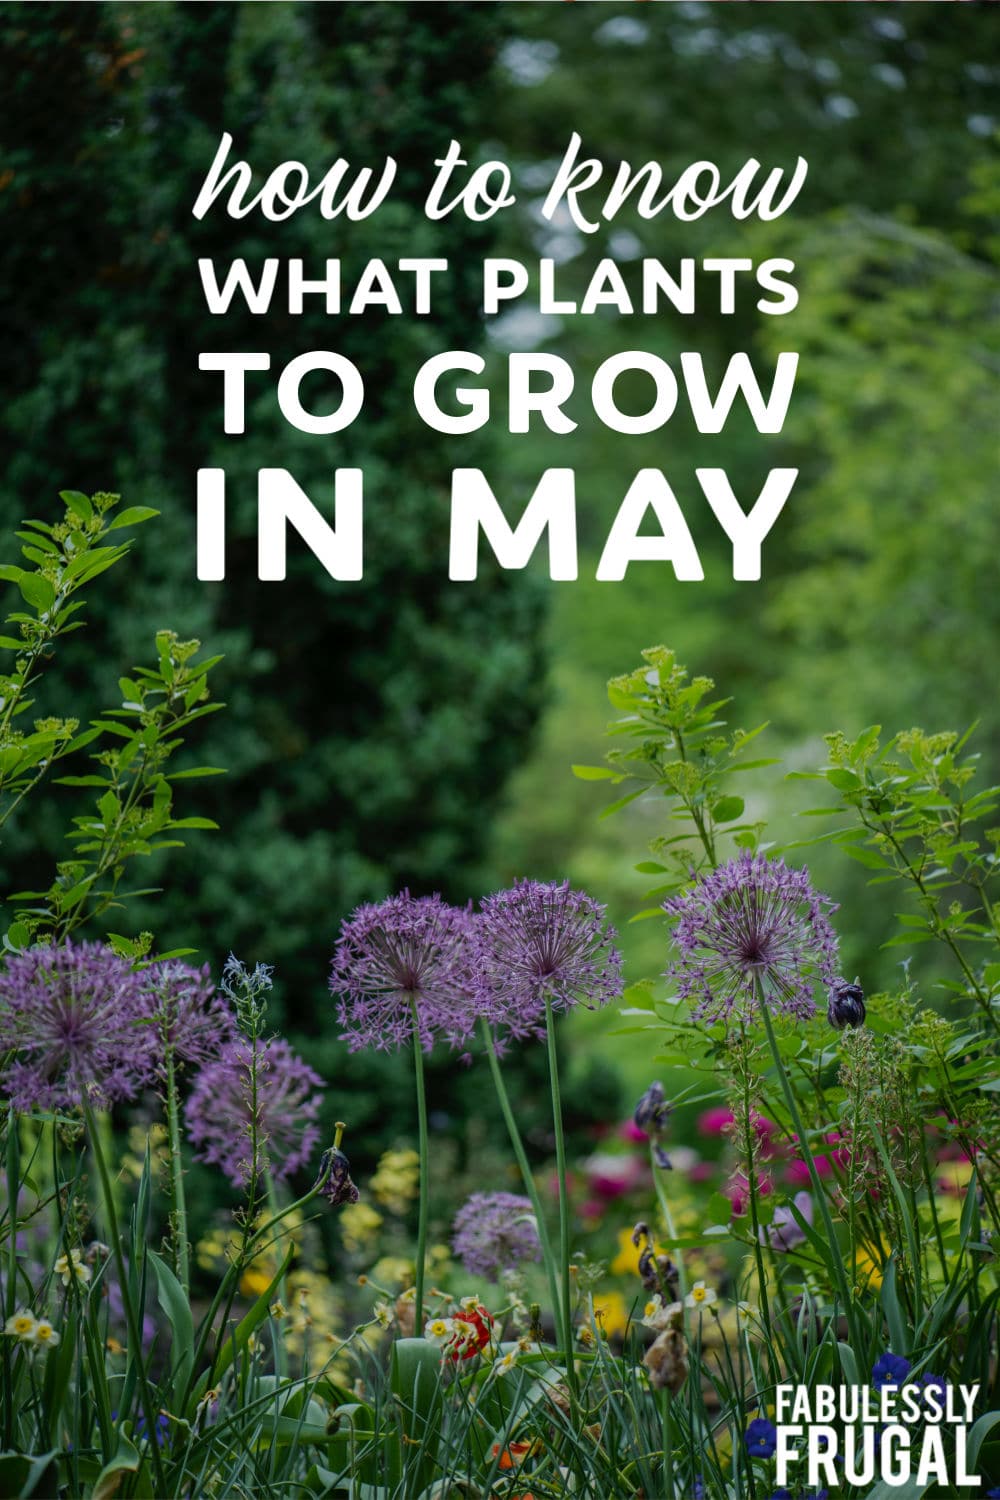 Plants to grow in May